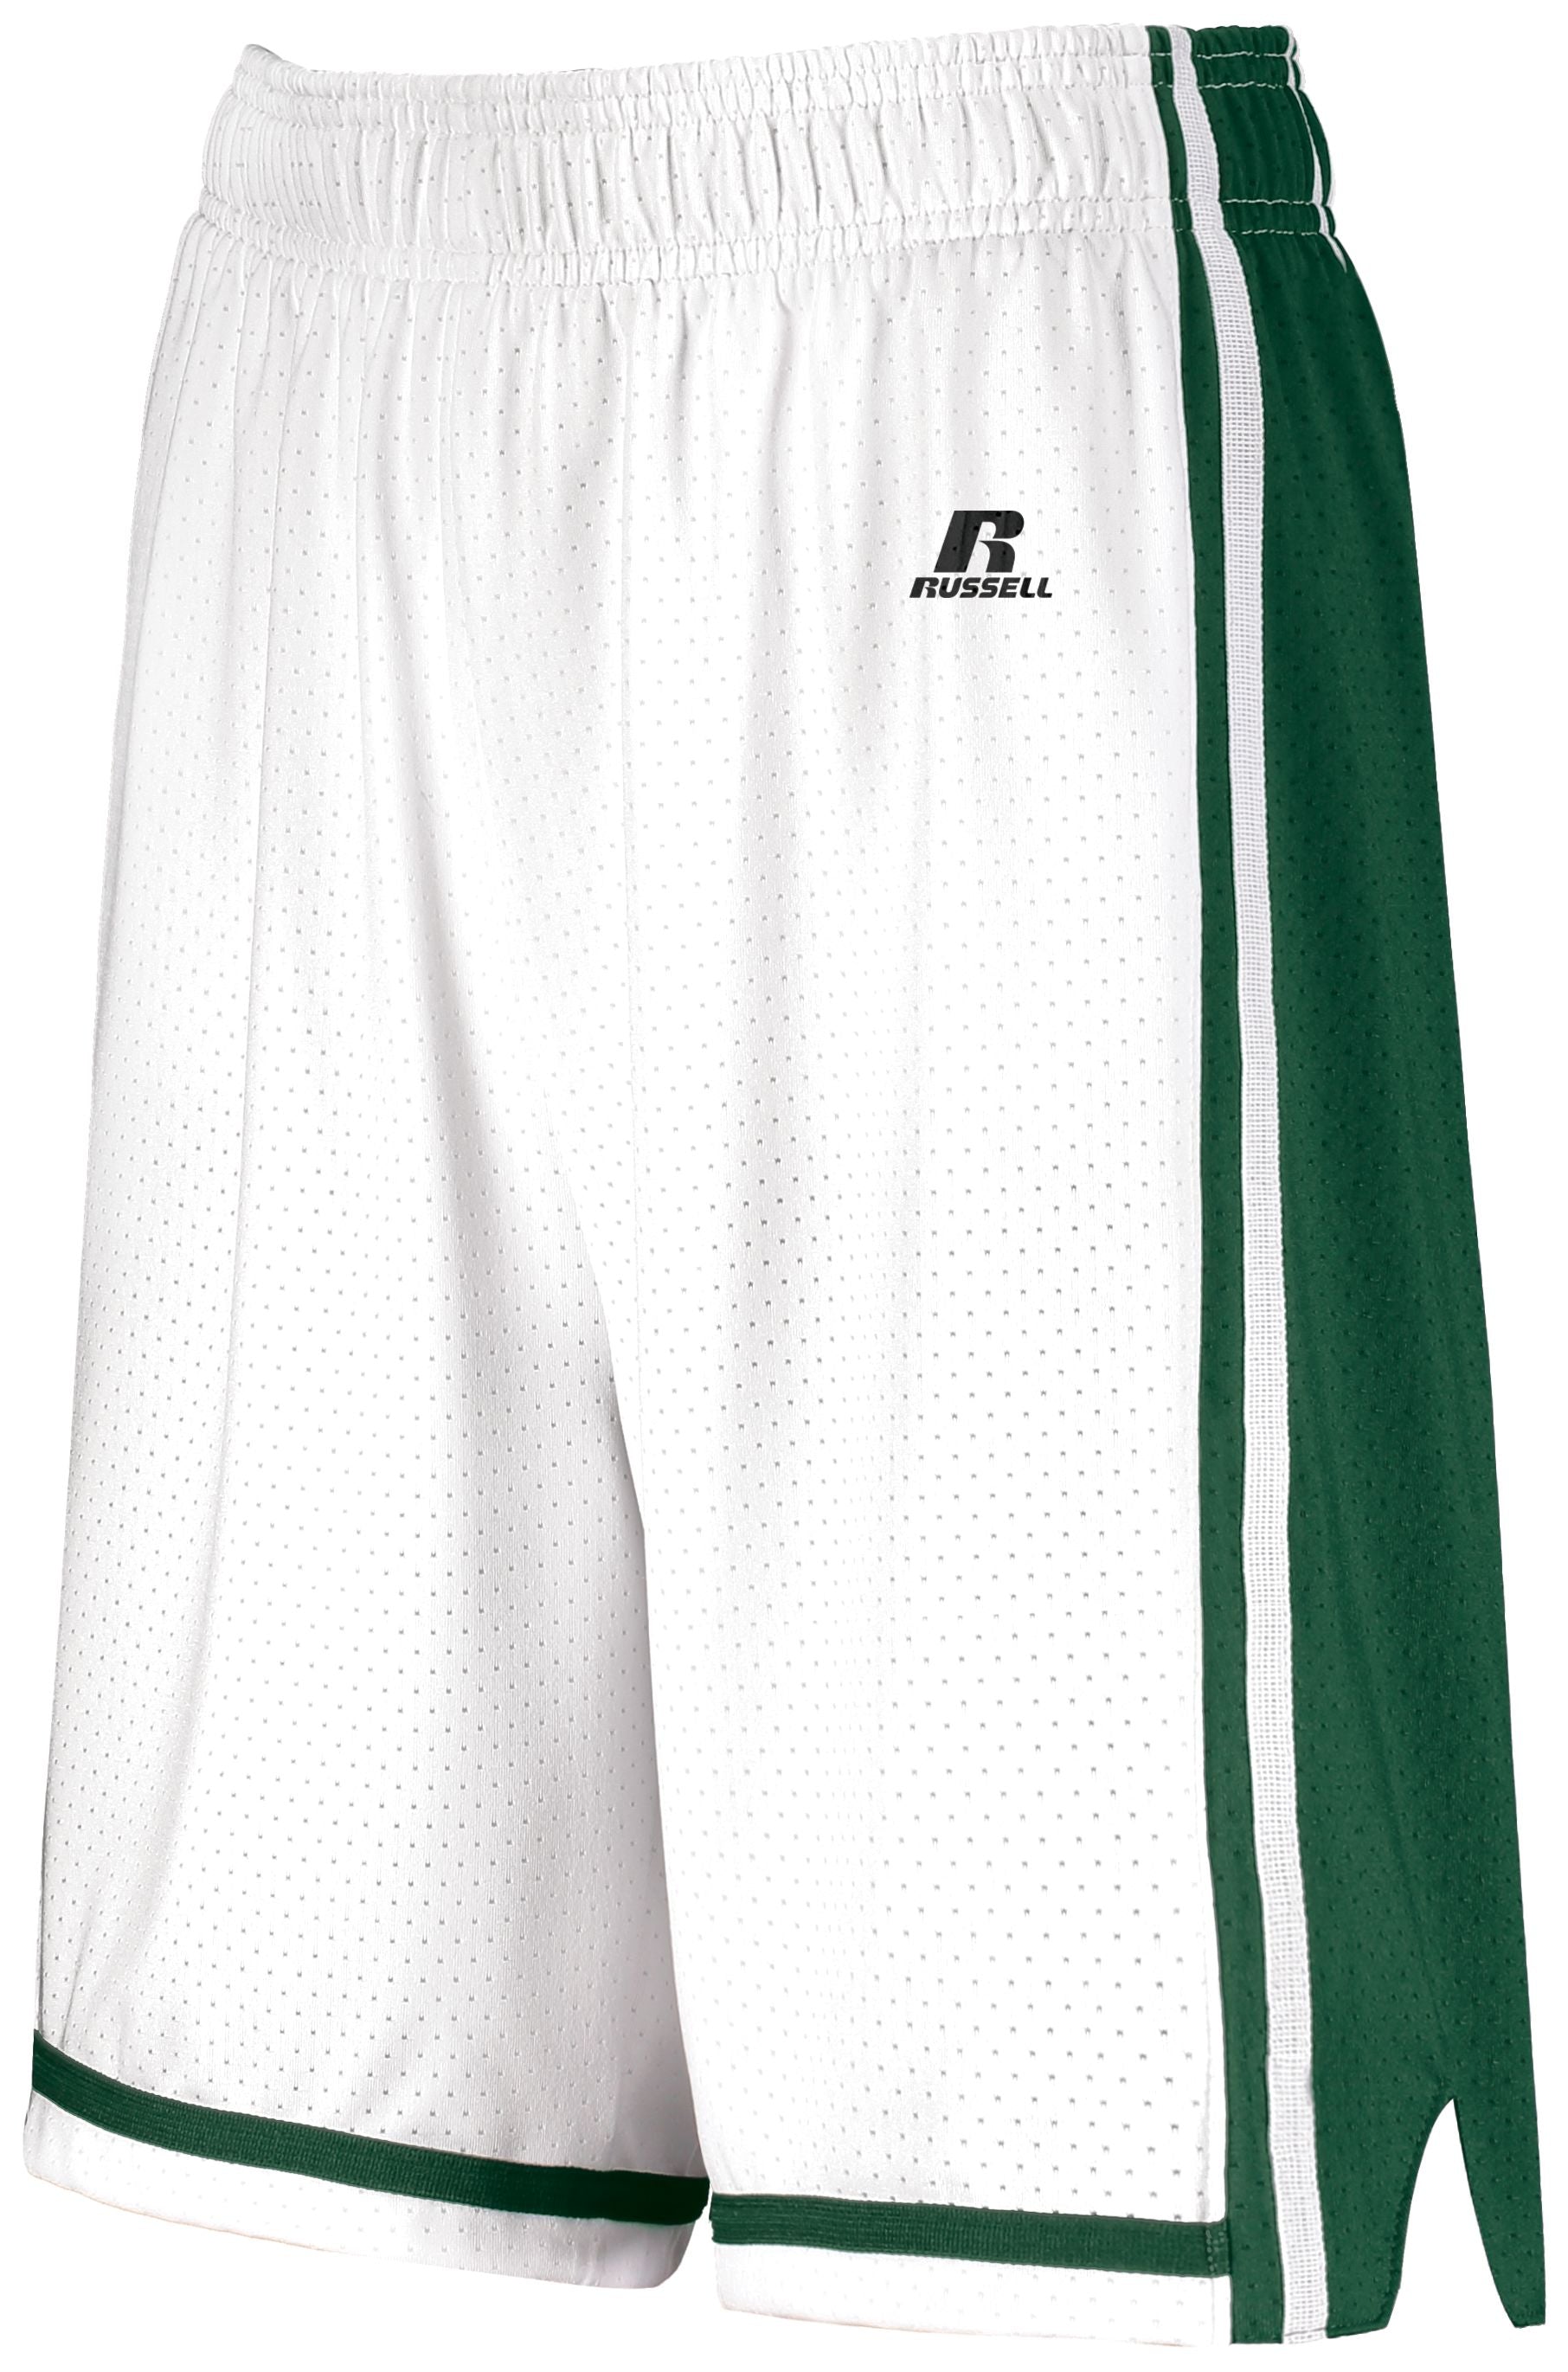 Russell Athletic Ladies Legacy Basketball Shorts in White/Dark Green  -Part of the Ladies, Ladies-Shorts, Basketball, Russell-Athletic-Products, All-Sports, All-Sports-1 product lines at KanaleyCreations.com